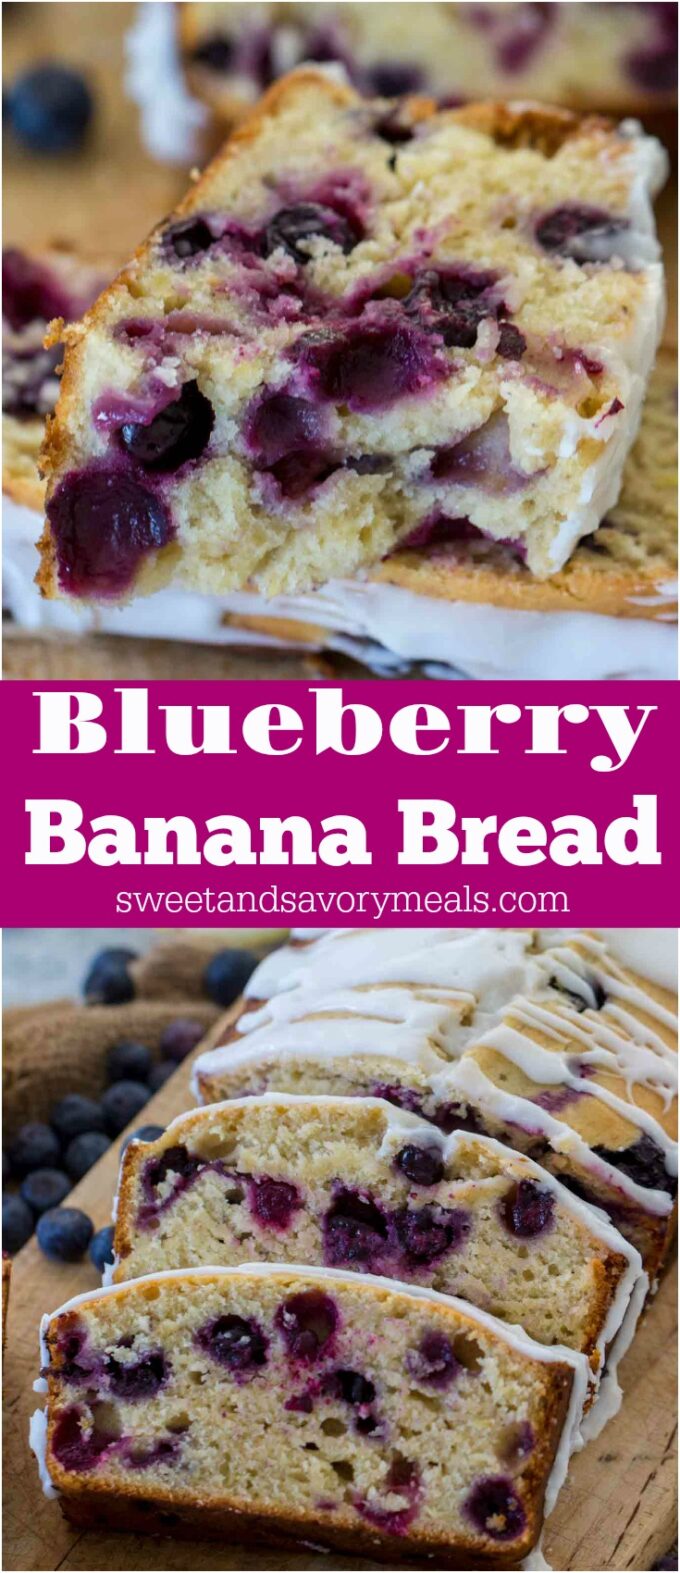 blueberry banana bread photo collage with text overlay for Pinterest